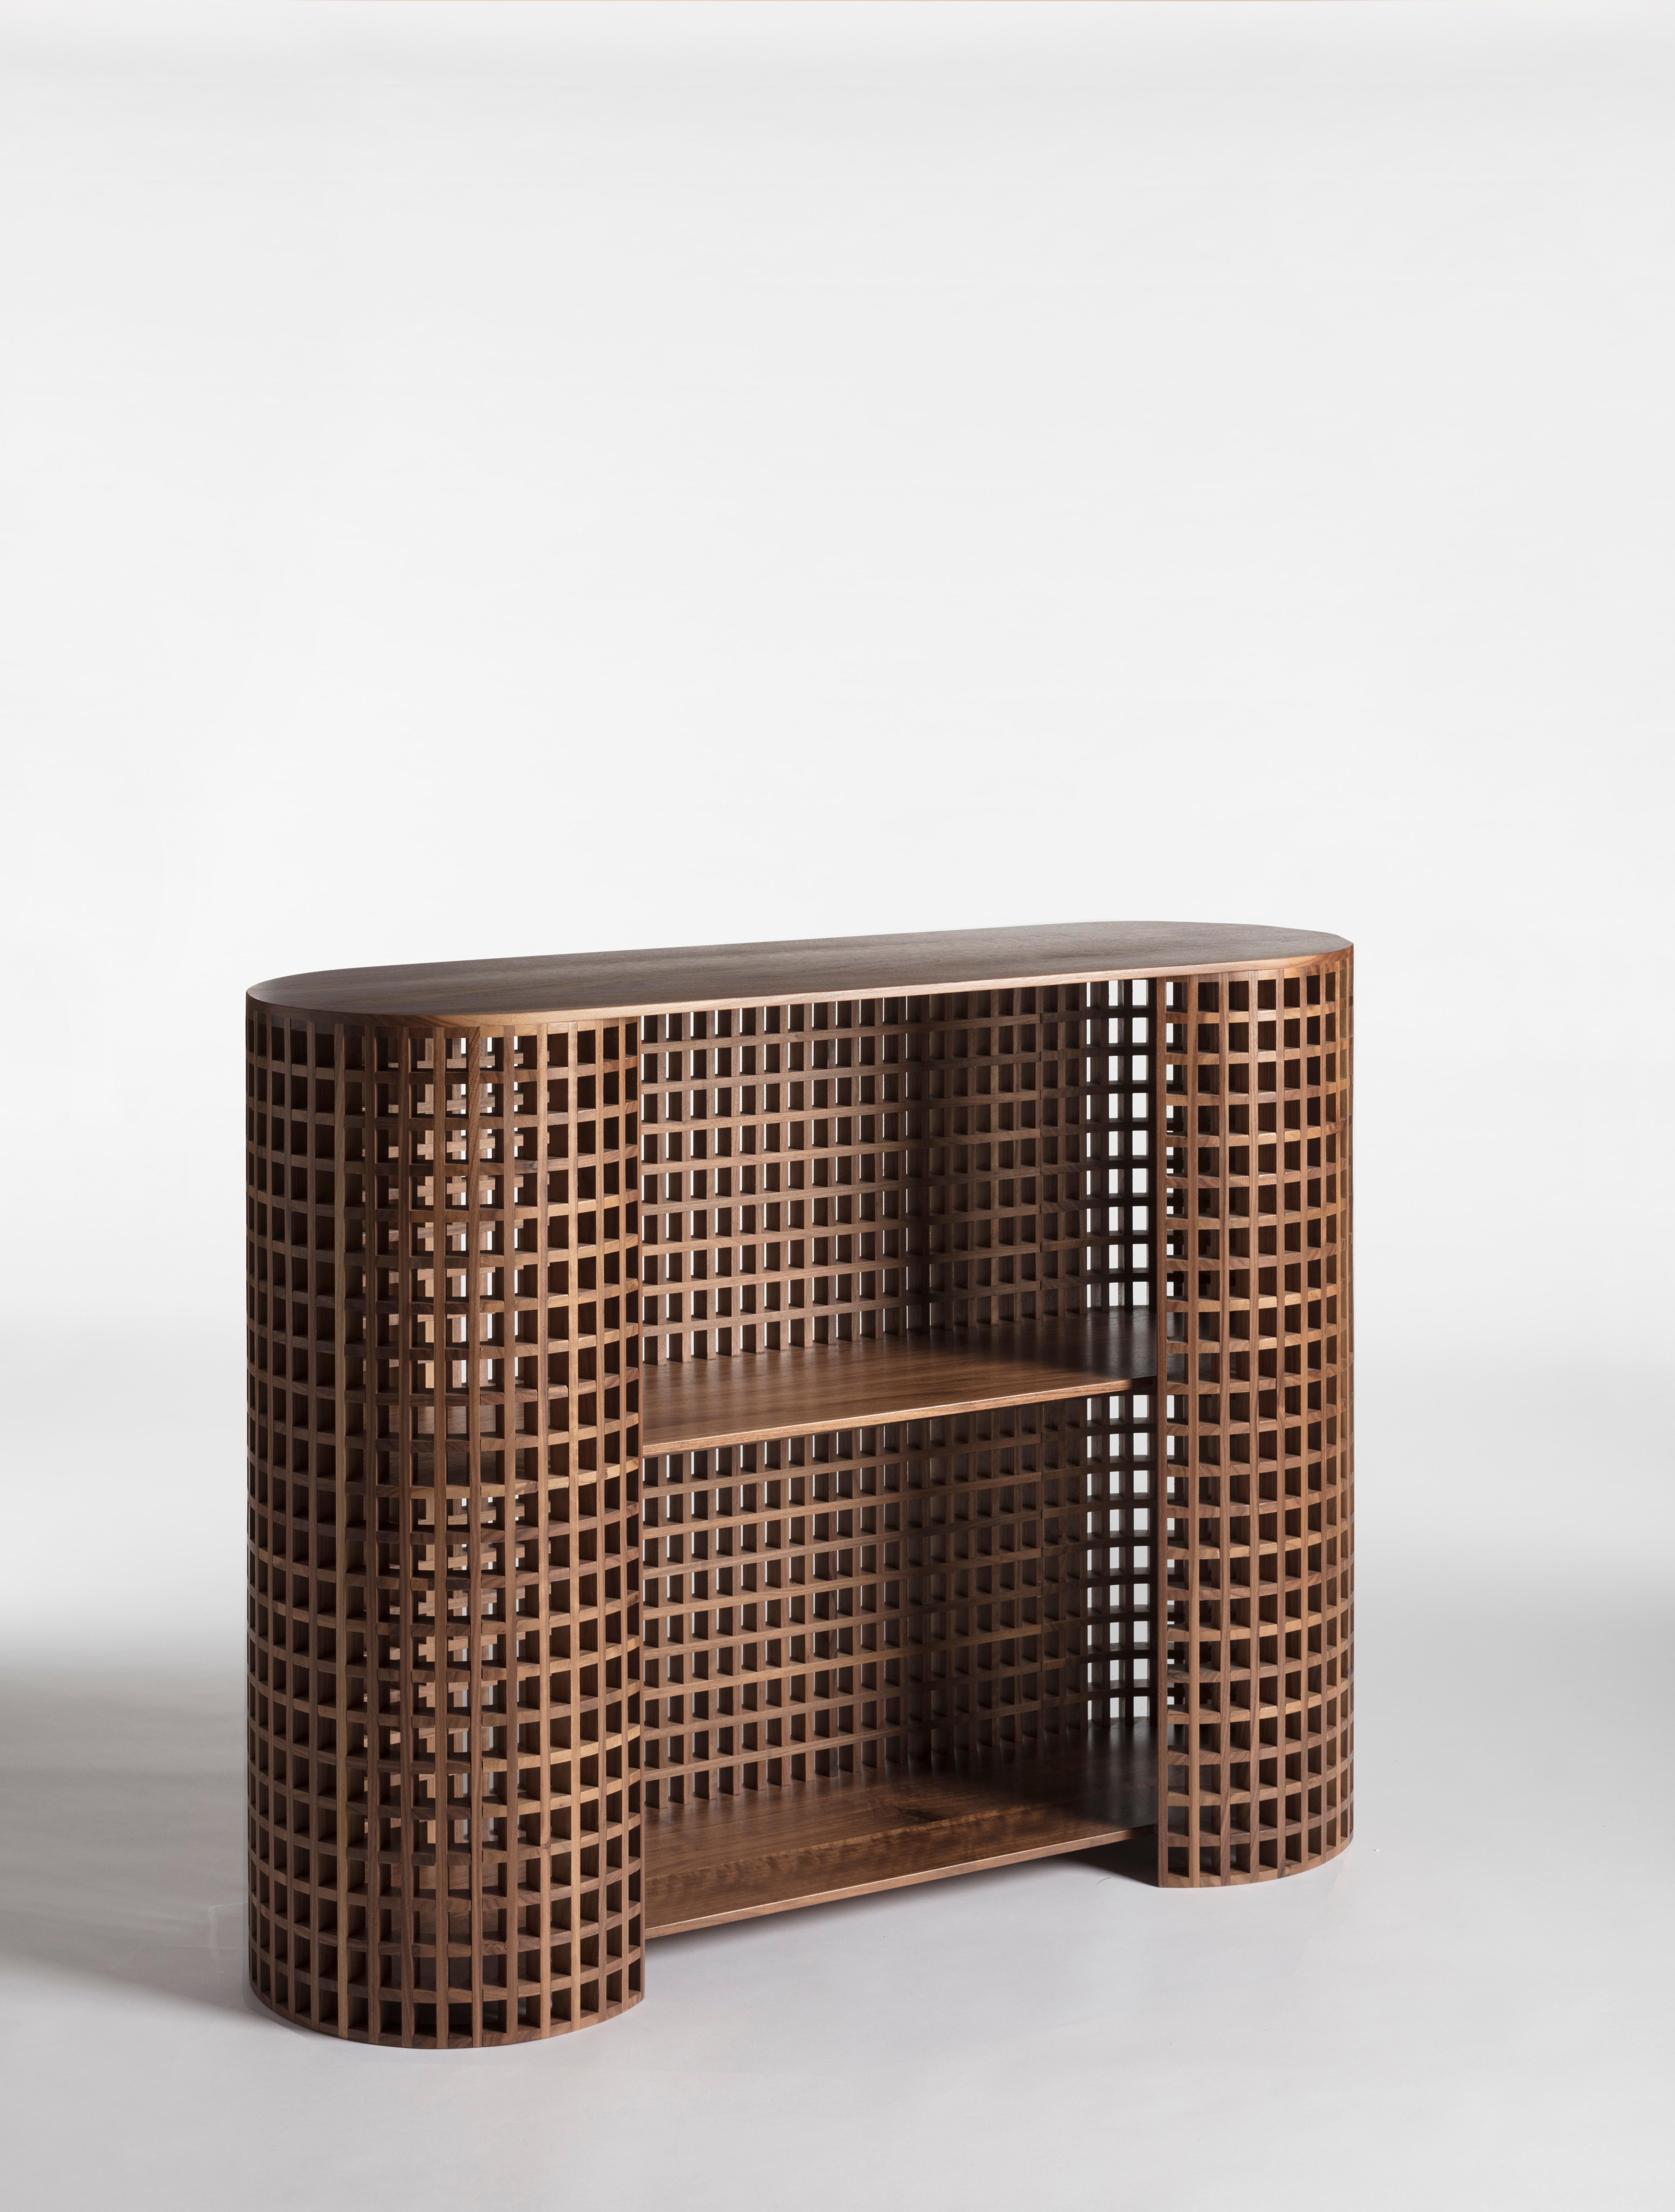 Carabottino drink cabinet by Cara \ Davide
Carabottino collection
Medulum
Dimensions: 117 x 38 x H 90cm
Materials: Canaletto walnut 

Also available: linden wood, European walnut

A wooden grating in a two-dimensional form traditionally made